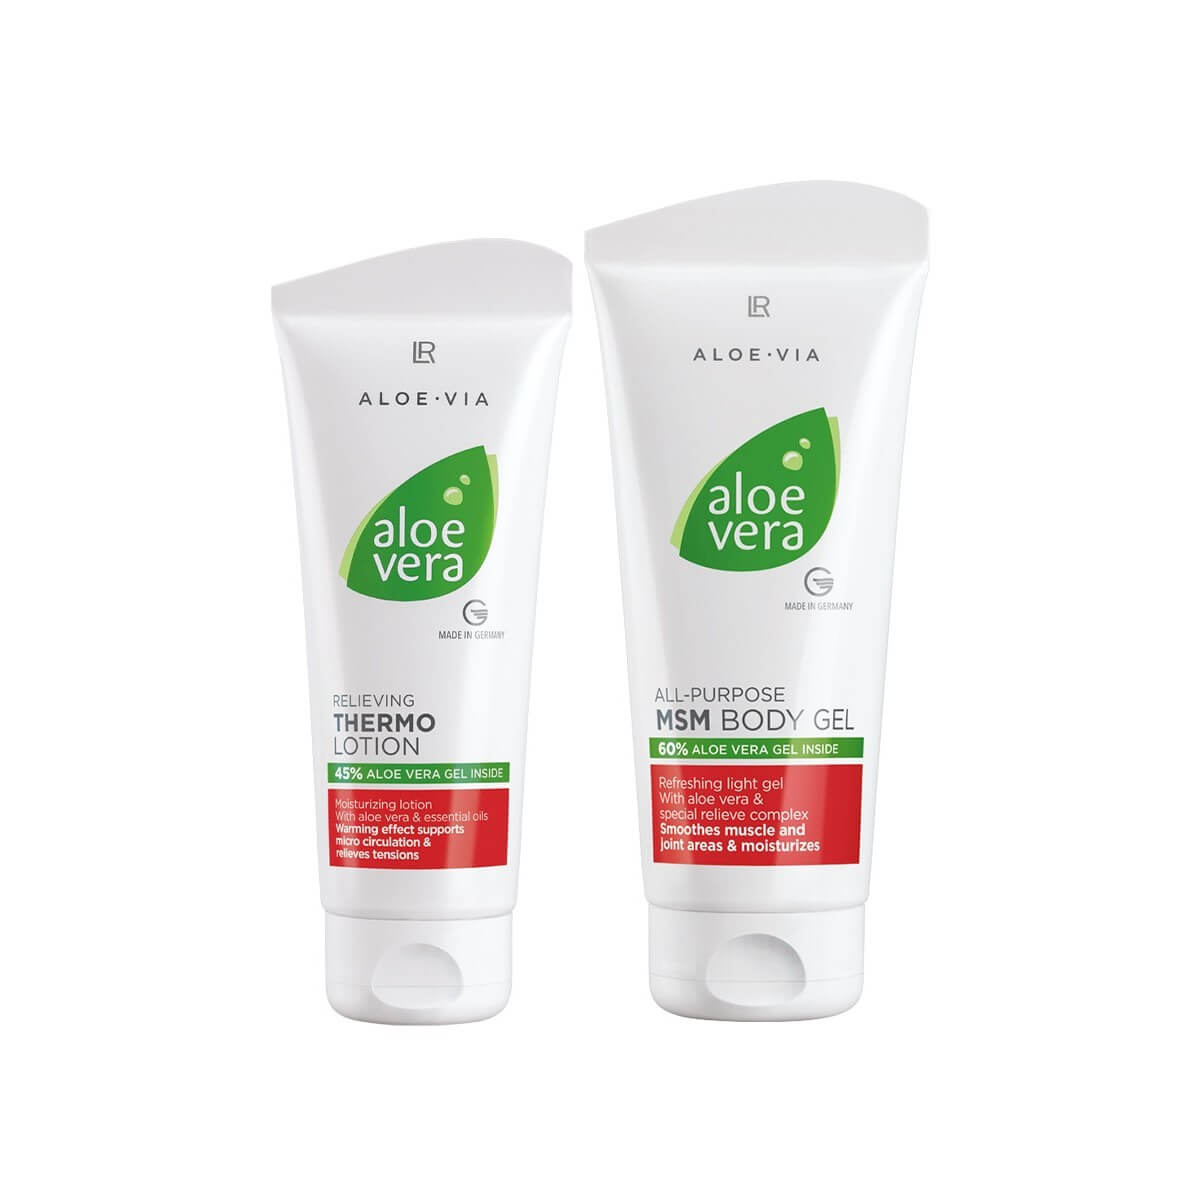 Aloe Vera Set - the best relax muscles joints